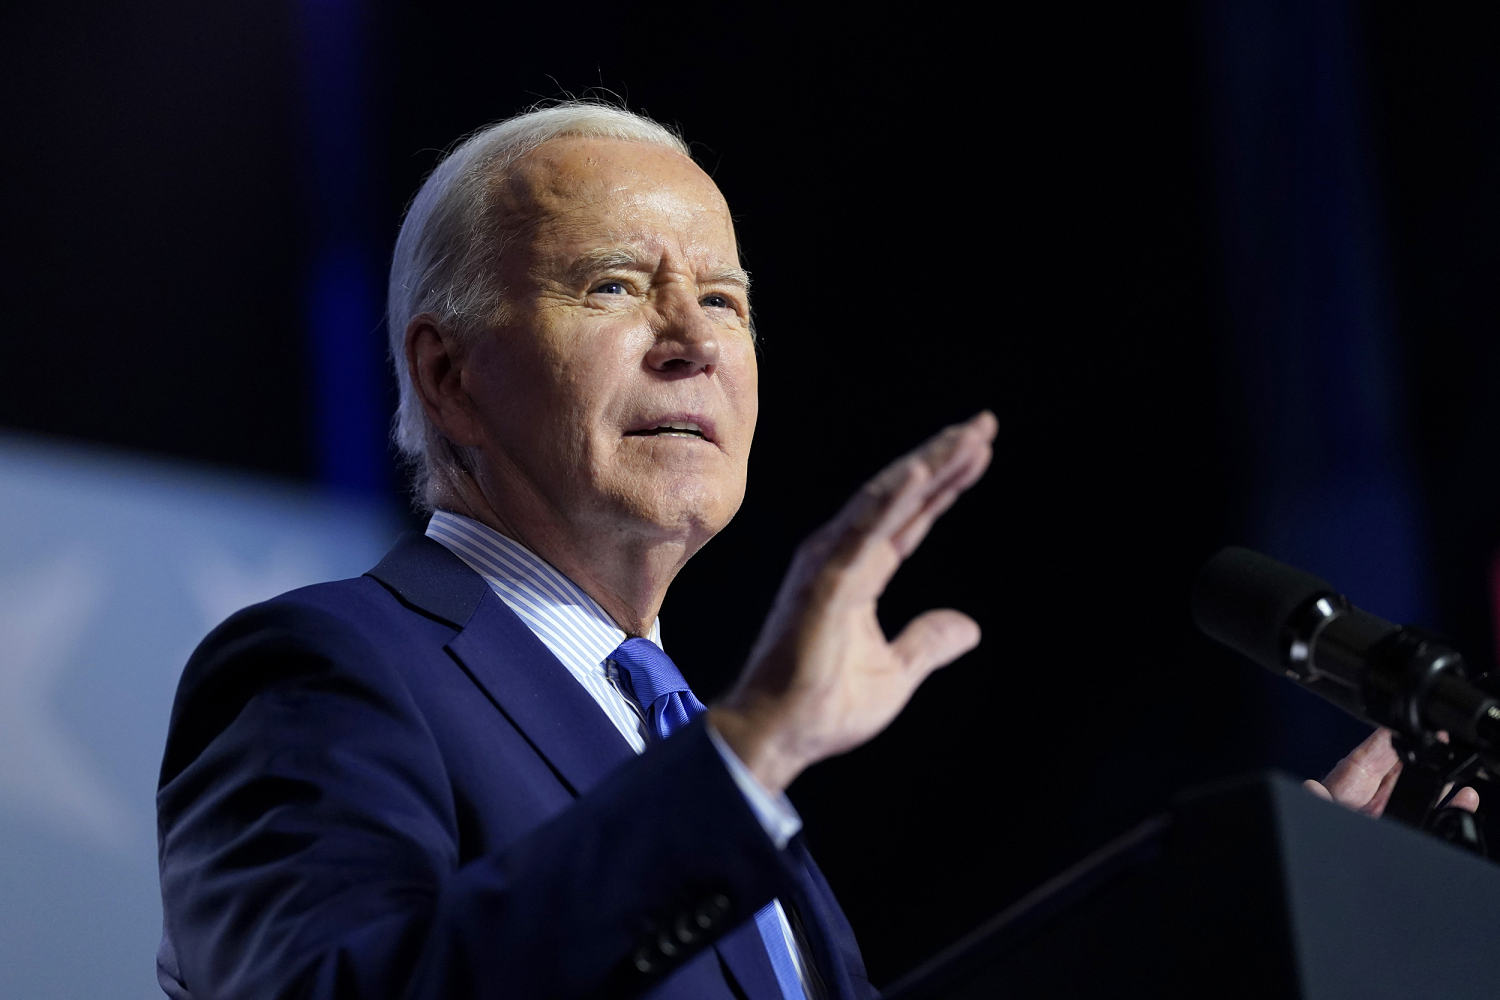 Antisemitic incidents rise on college campuses — and Biden faces pressure to address them